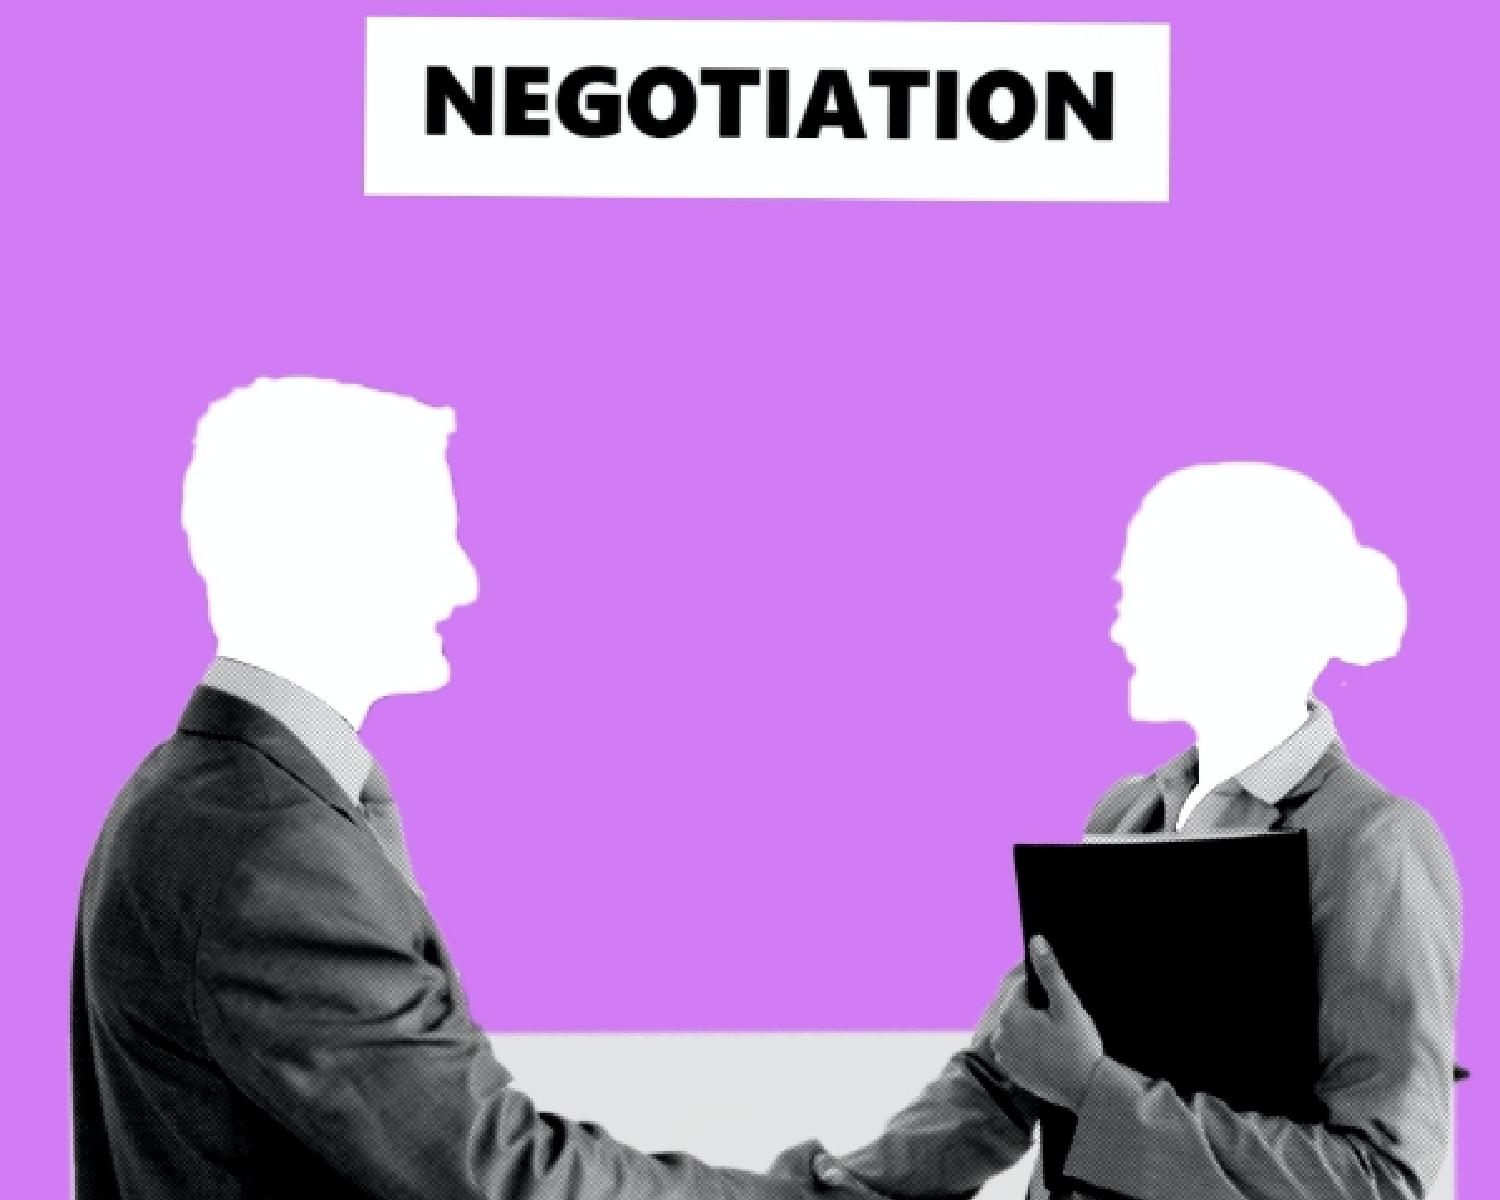 Learn to negotiate